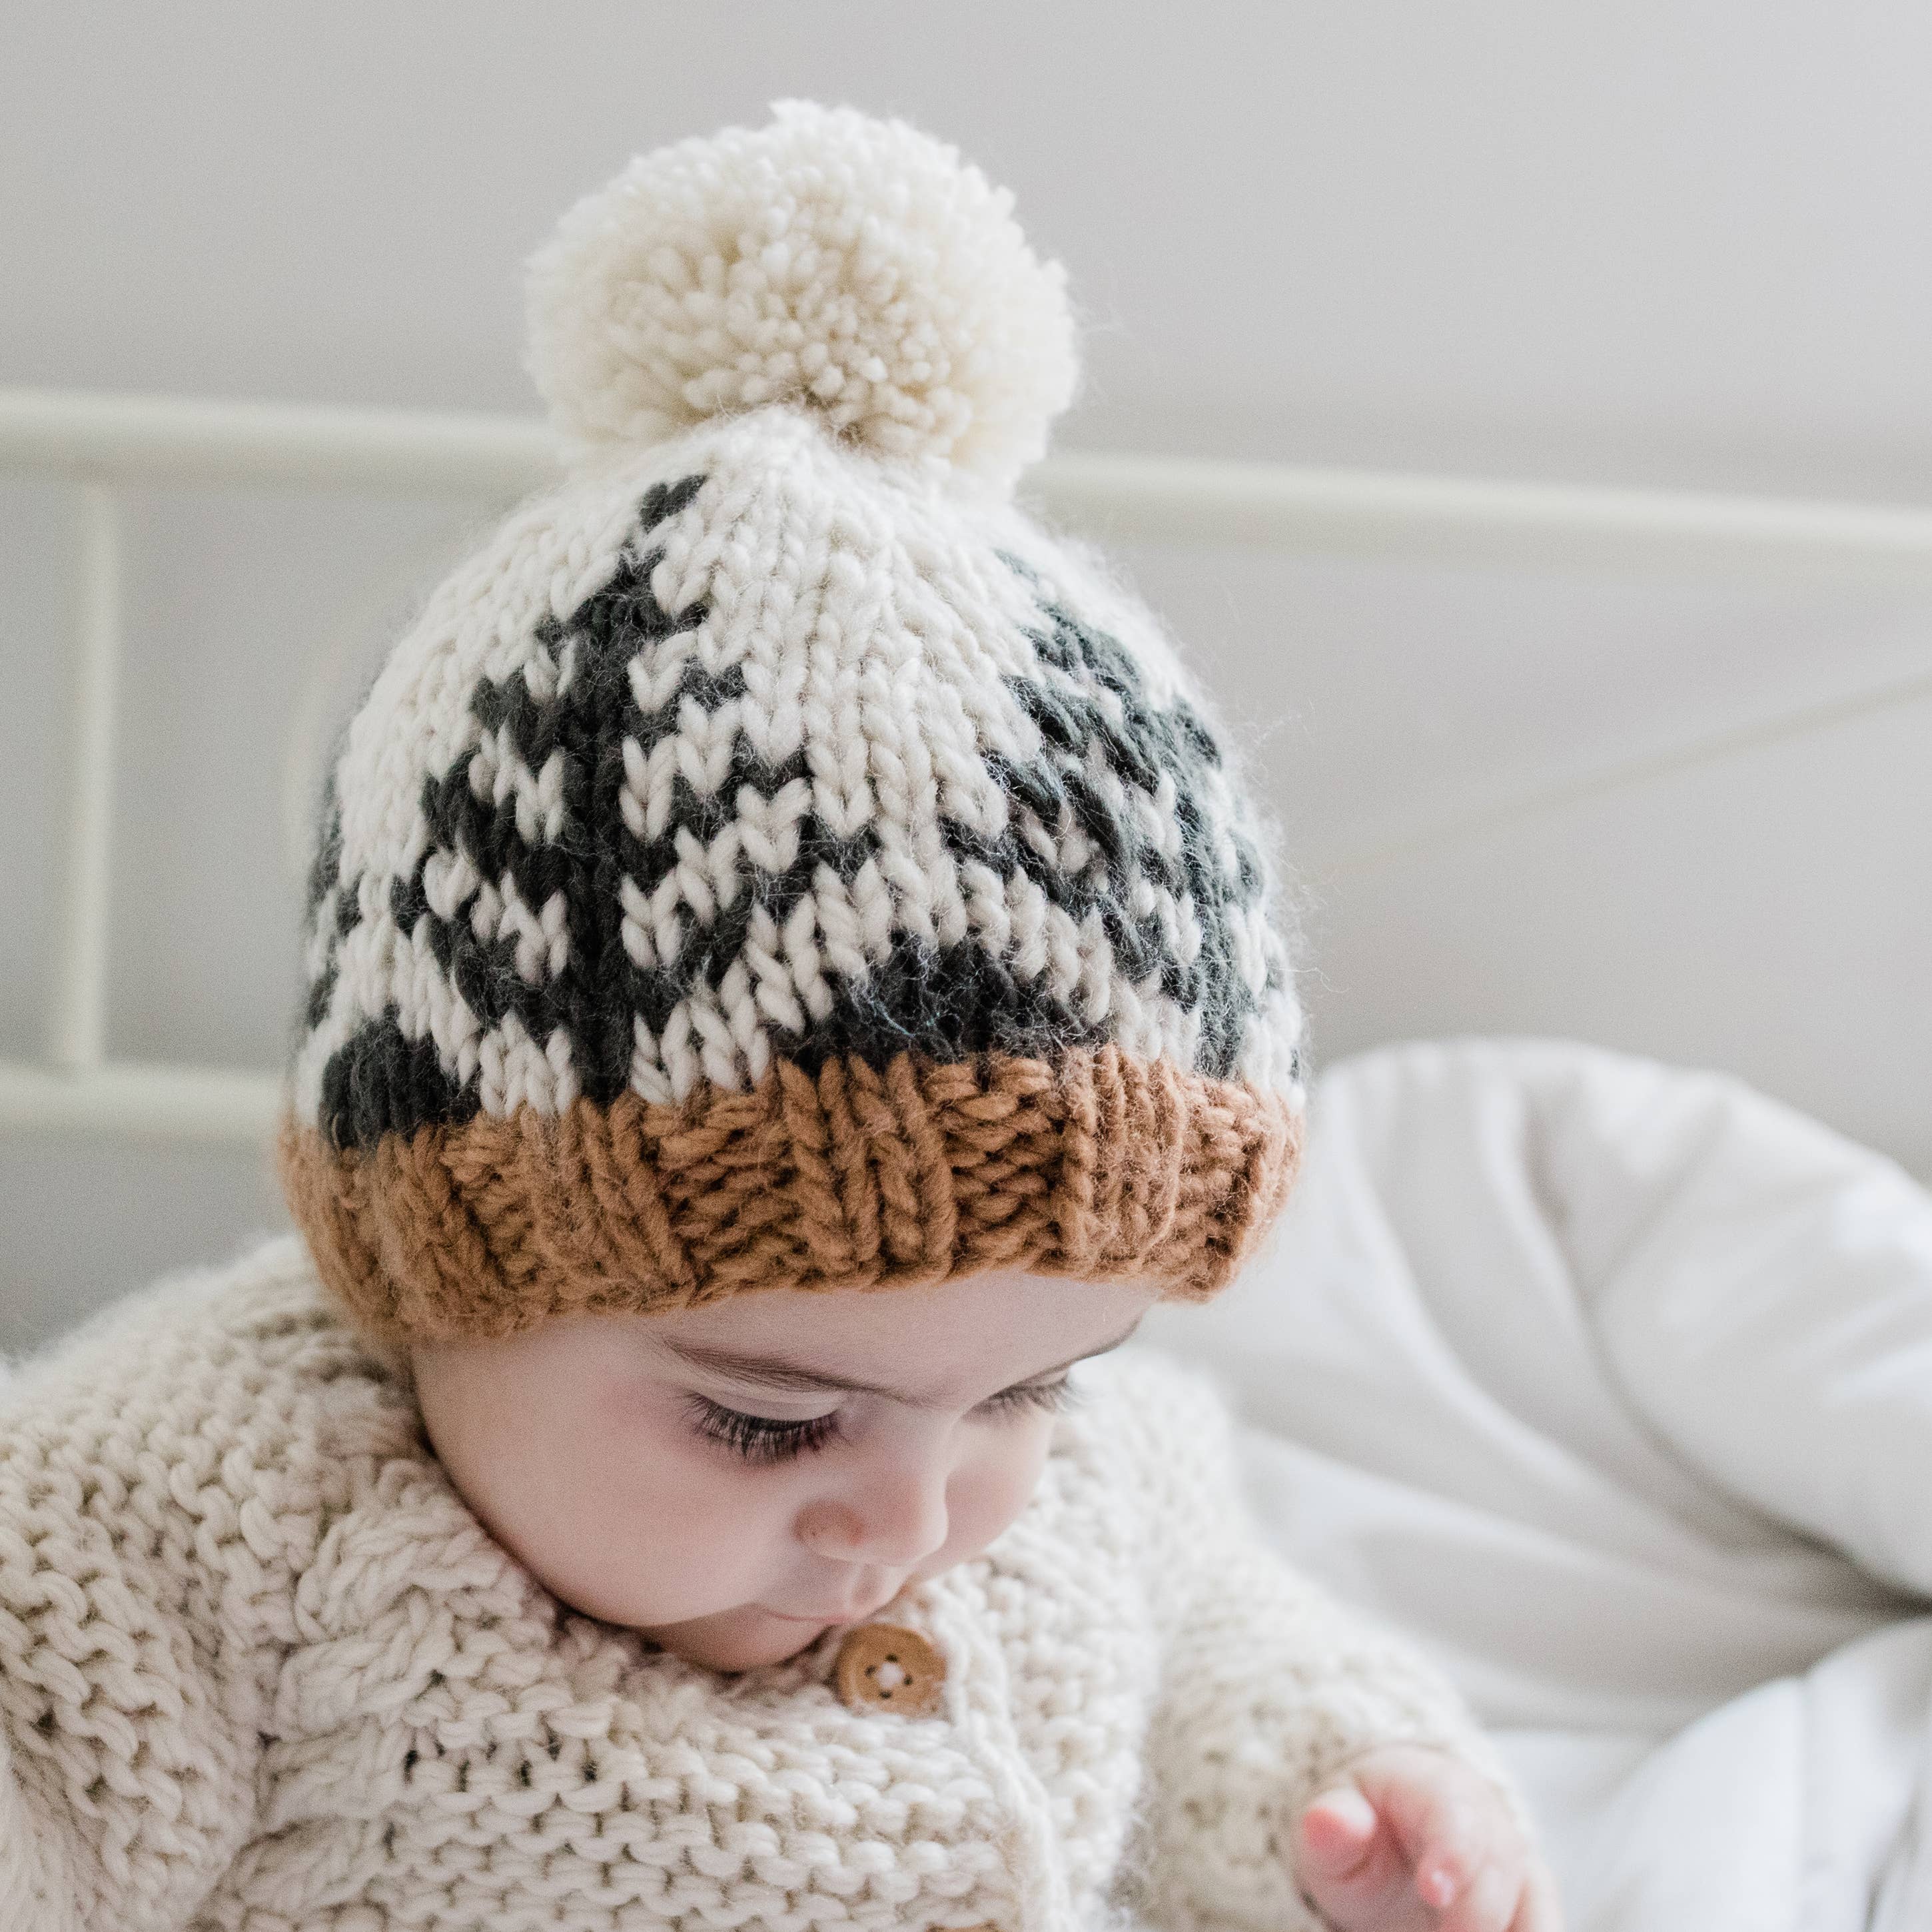 Huggalugs - Forest Knit Beanie Hat: L (2-6 years)